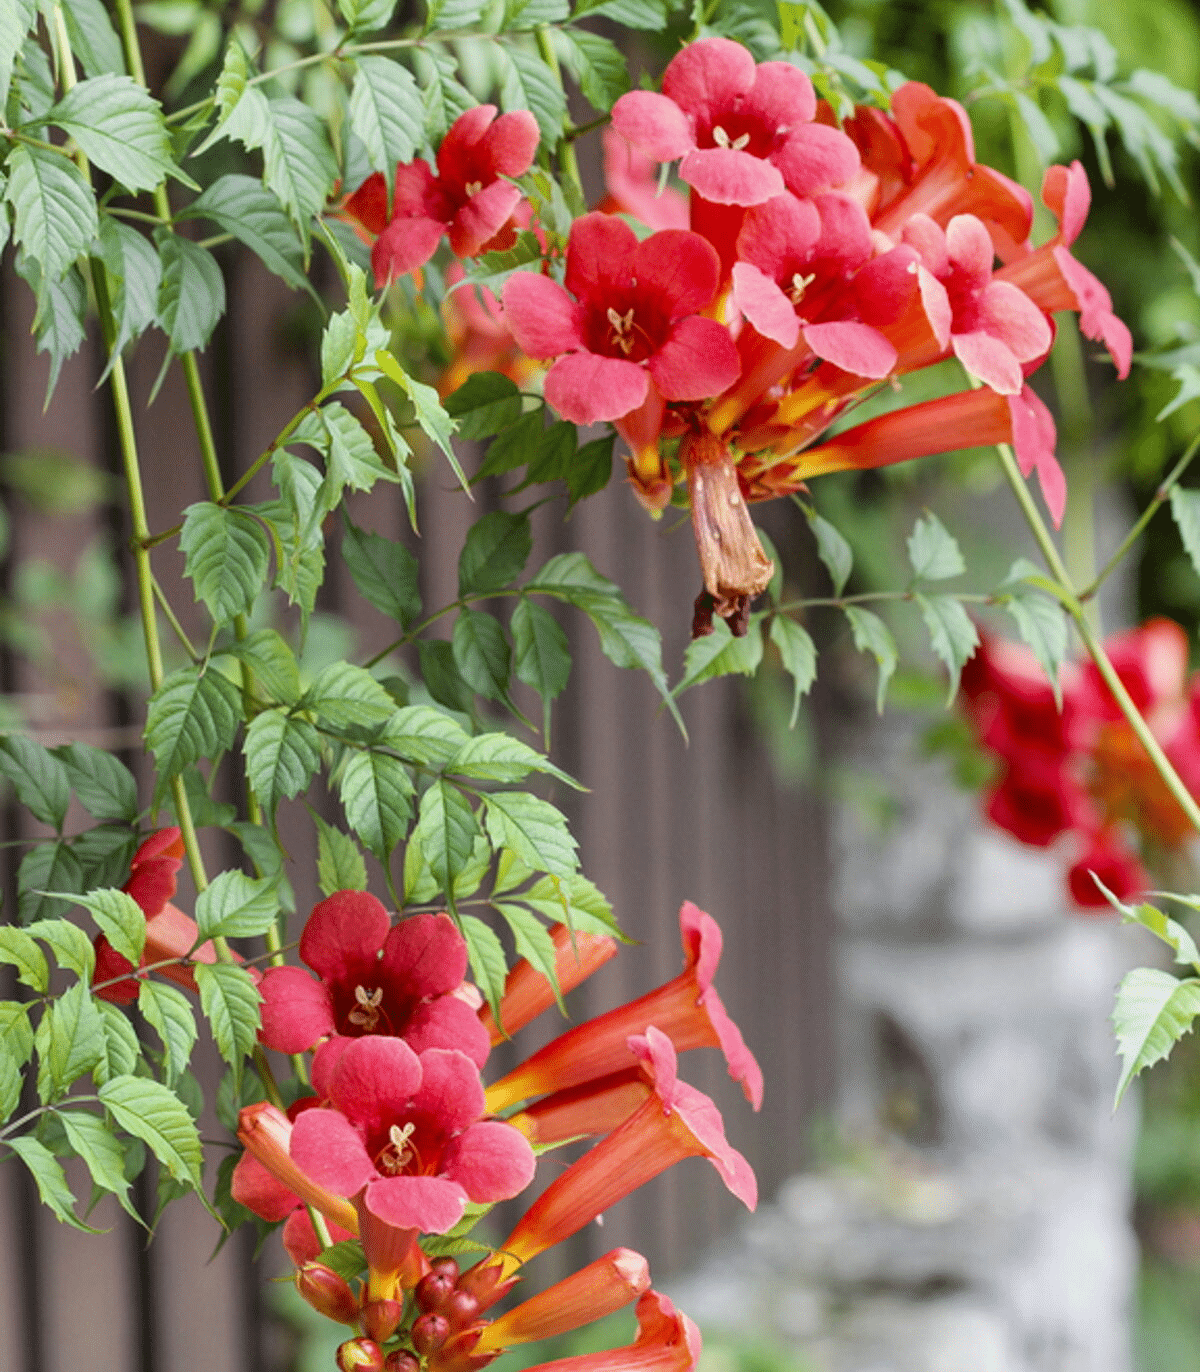 Bell shaped flowers  called trumpet vine flowers